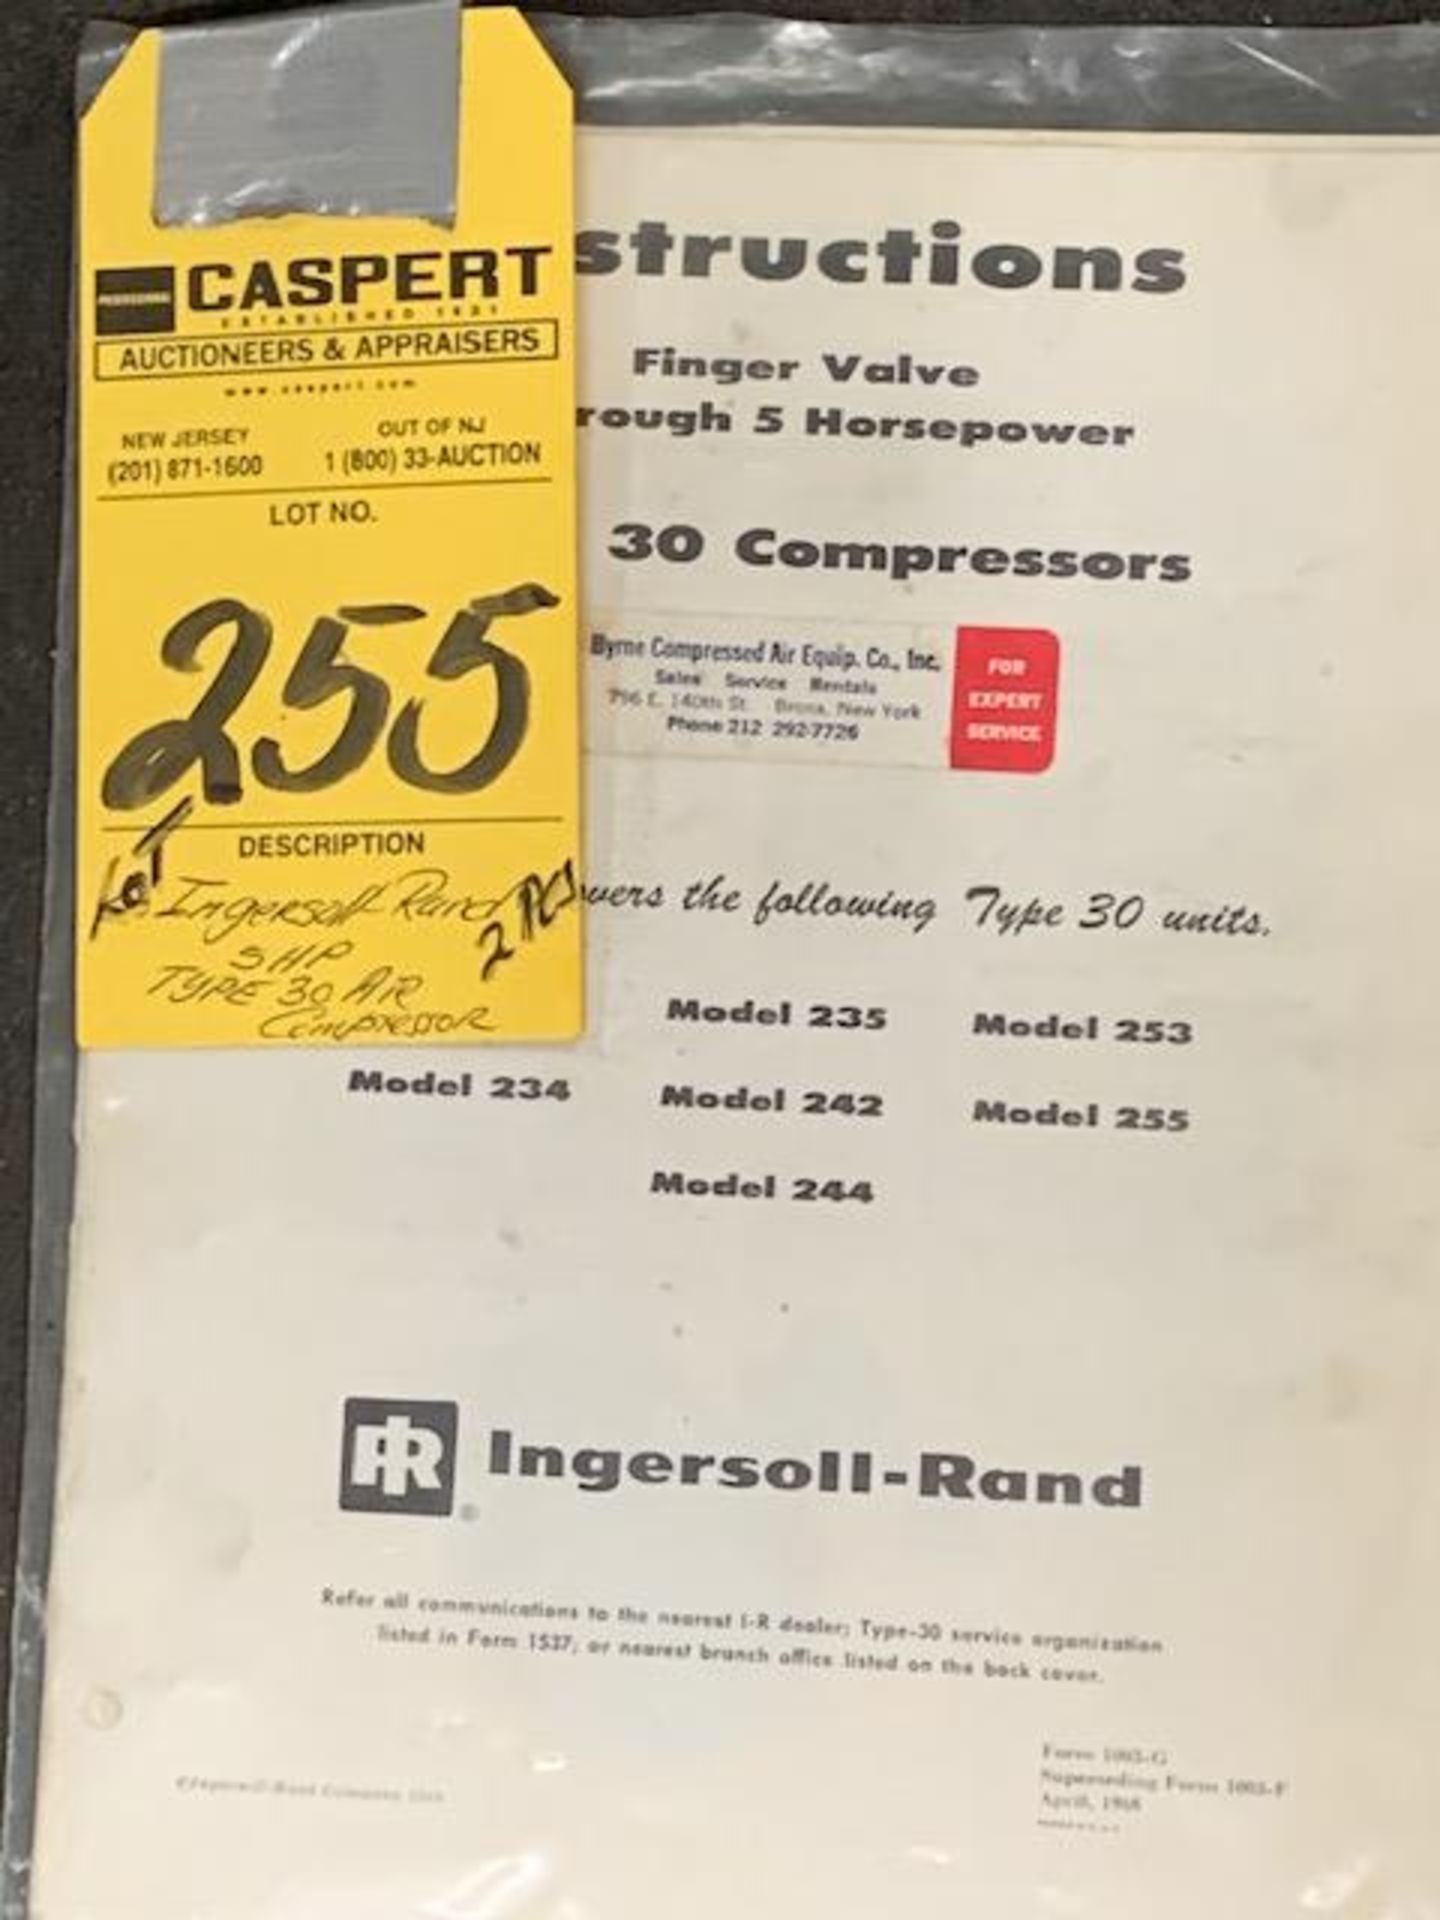 LOT - Ingersoll-Rand 5HP Type 30 Air Compressor (2 Pcs) - Image 2 of 3